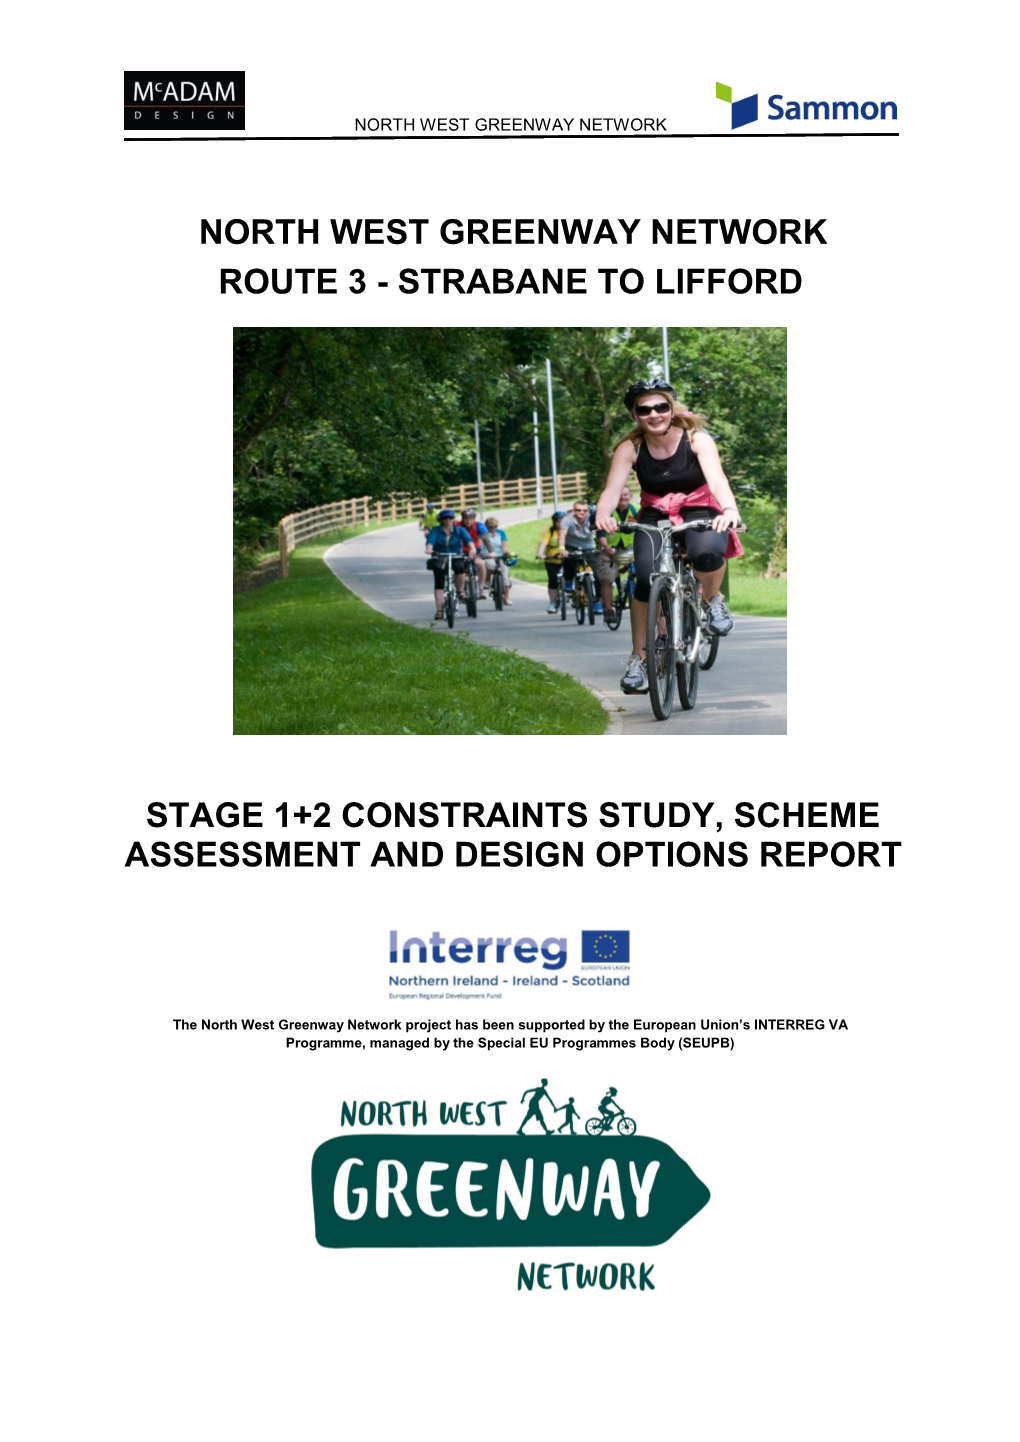 North West Greenway Network Route 3 - Strabane to Lifford